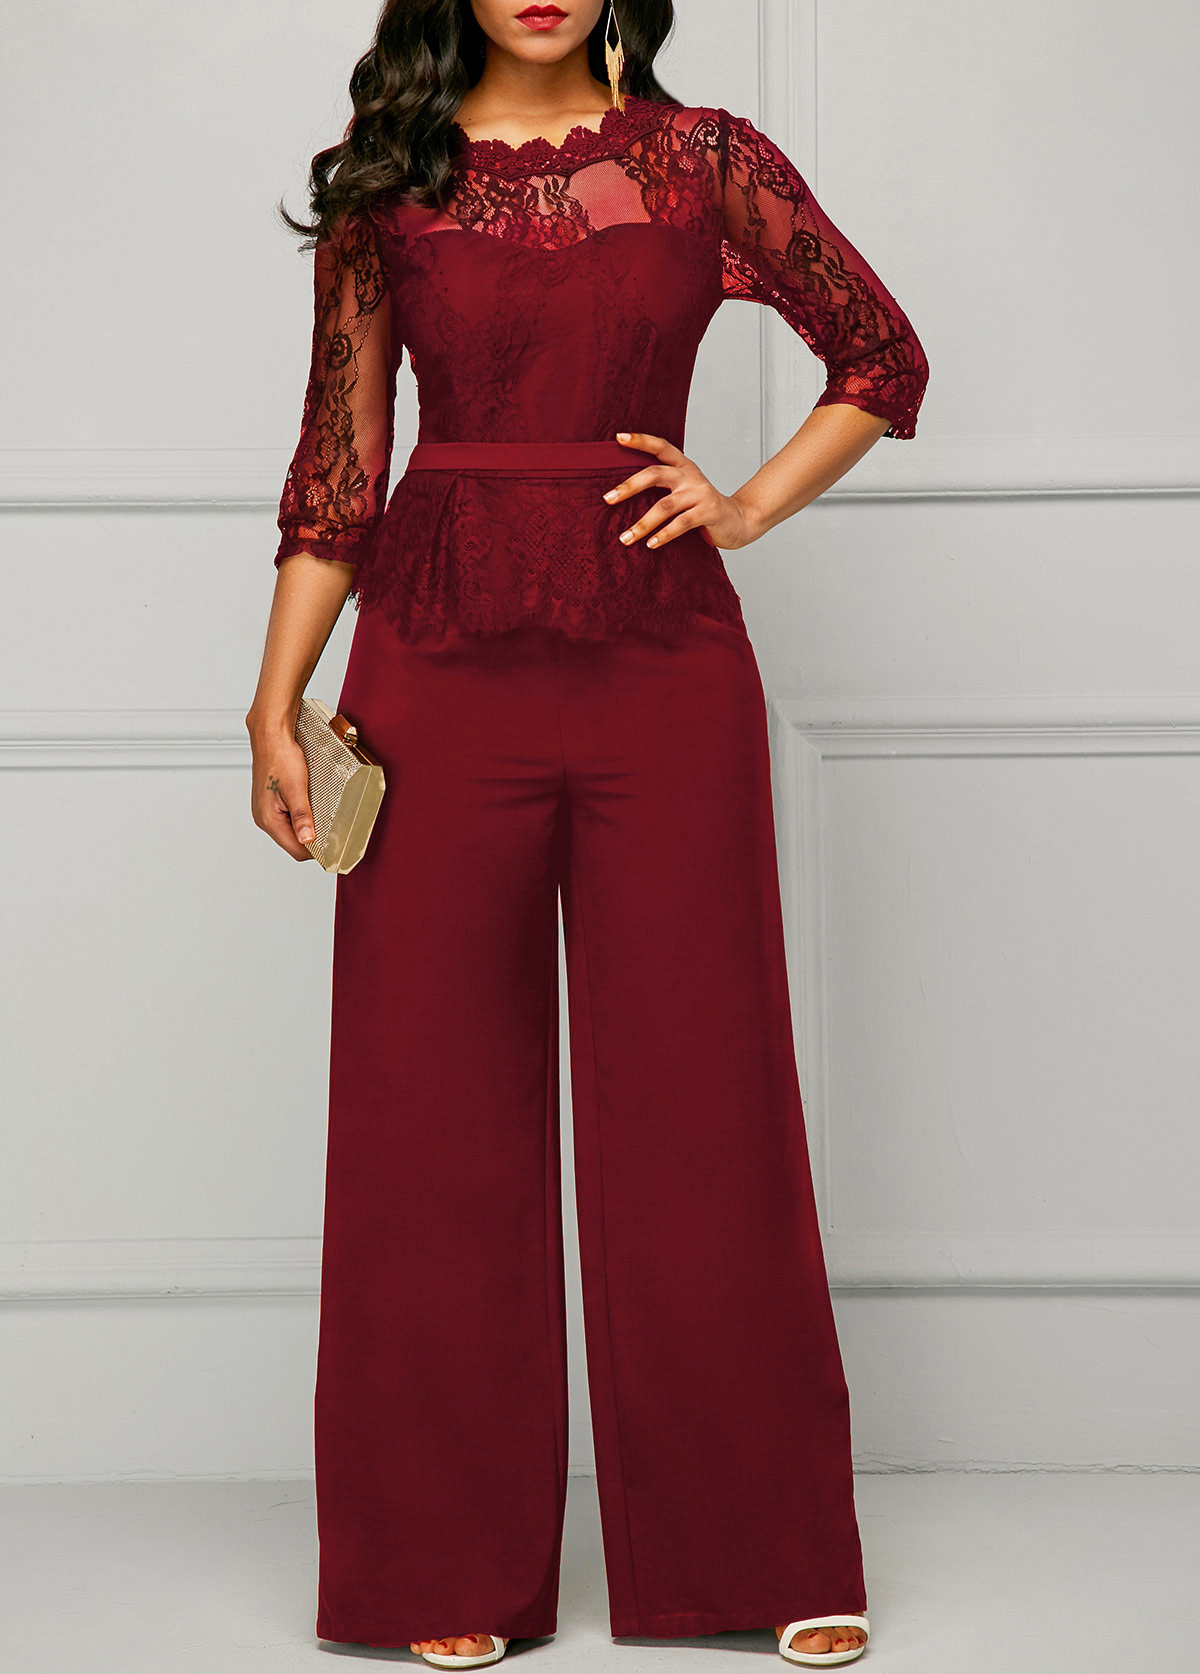 Lace Panel Round Neck Wine Red Jumpsuit